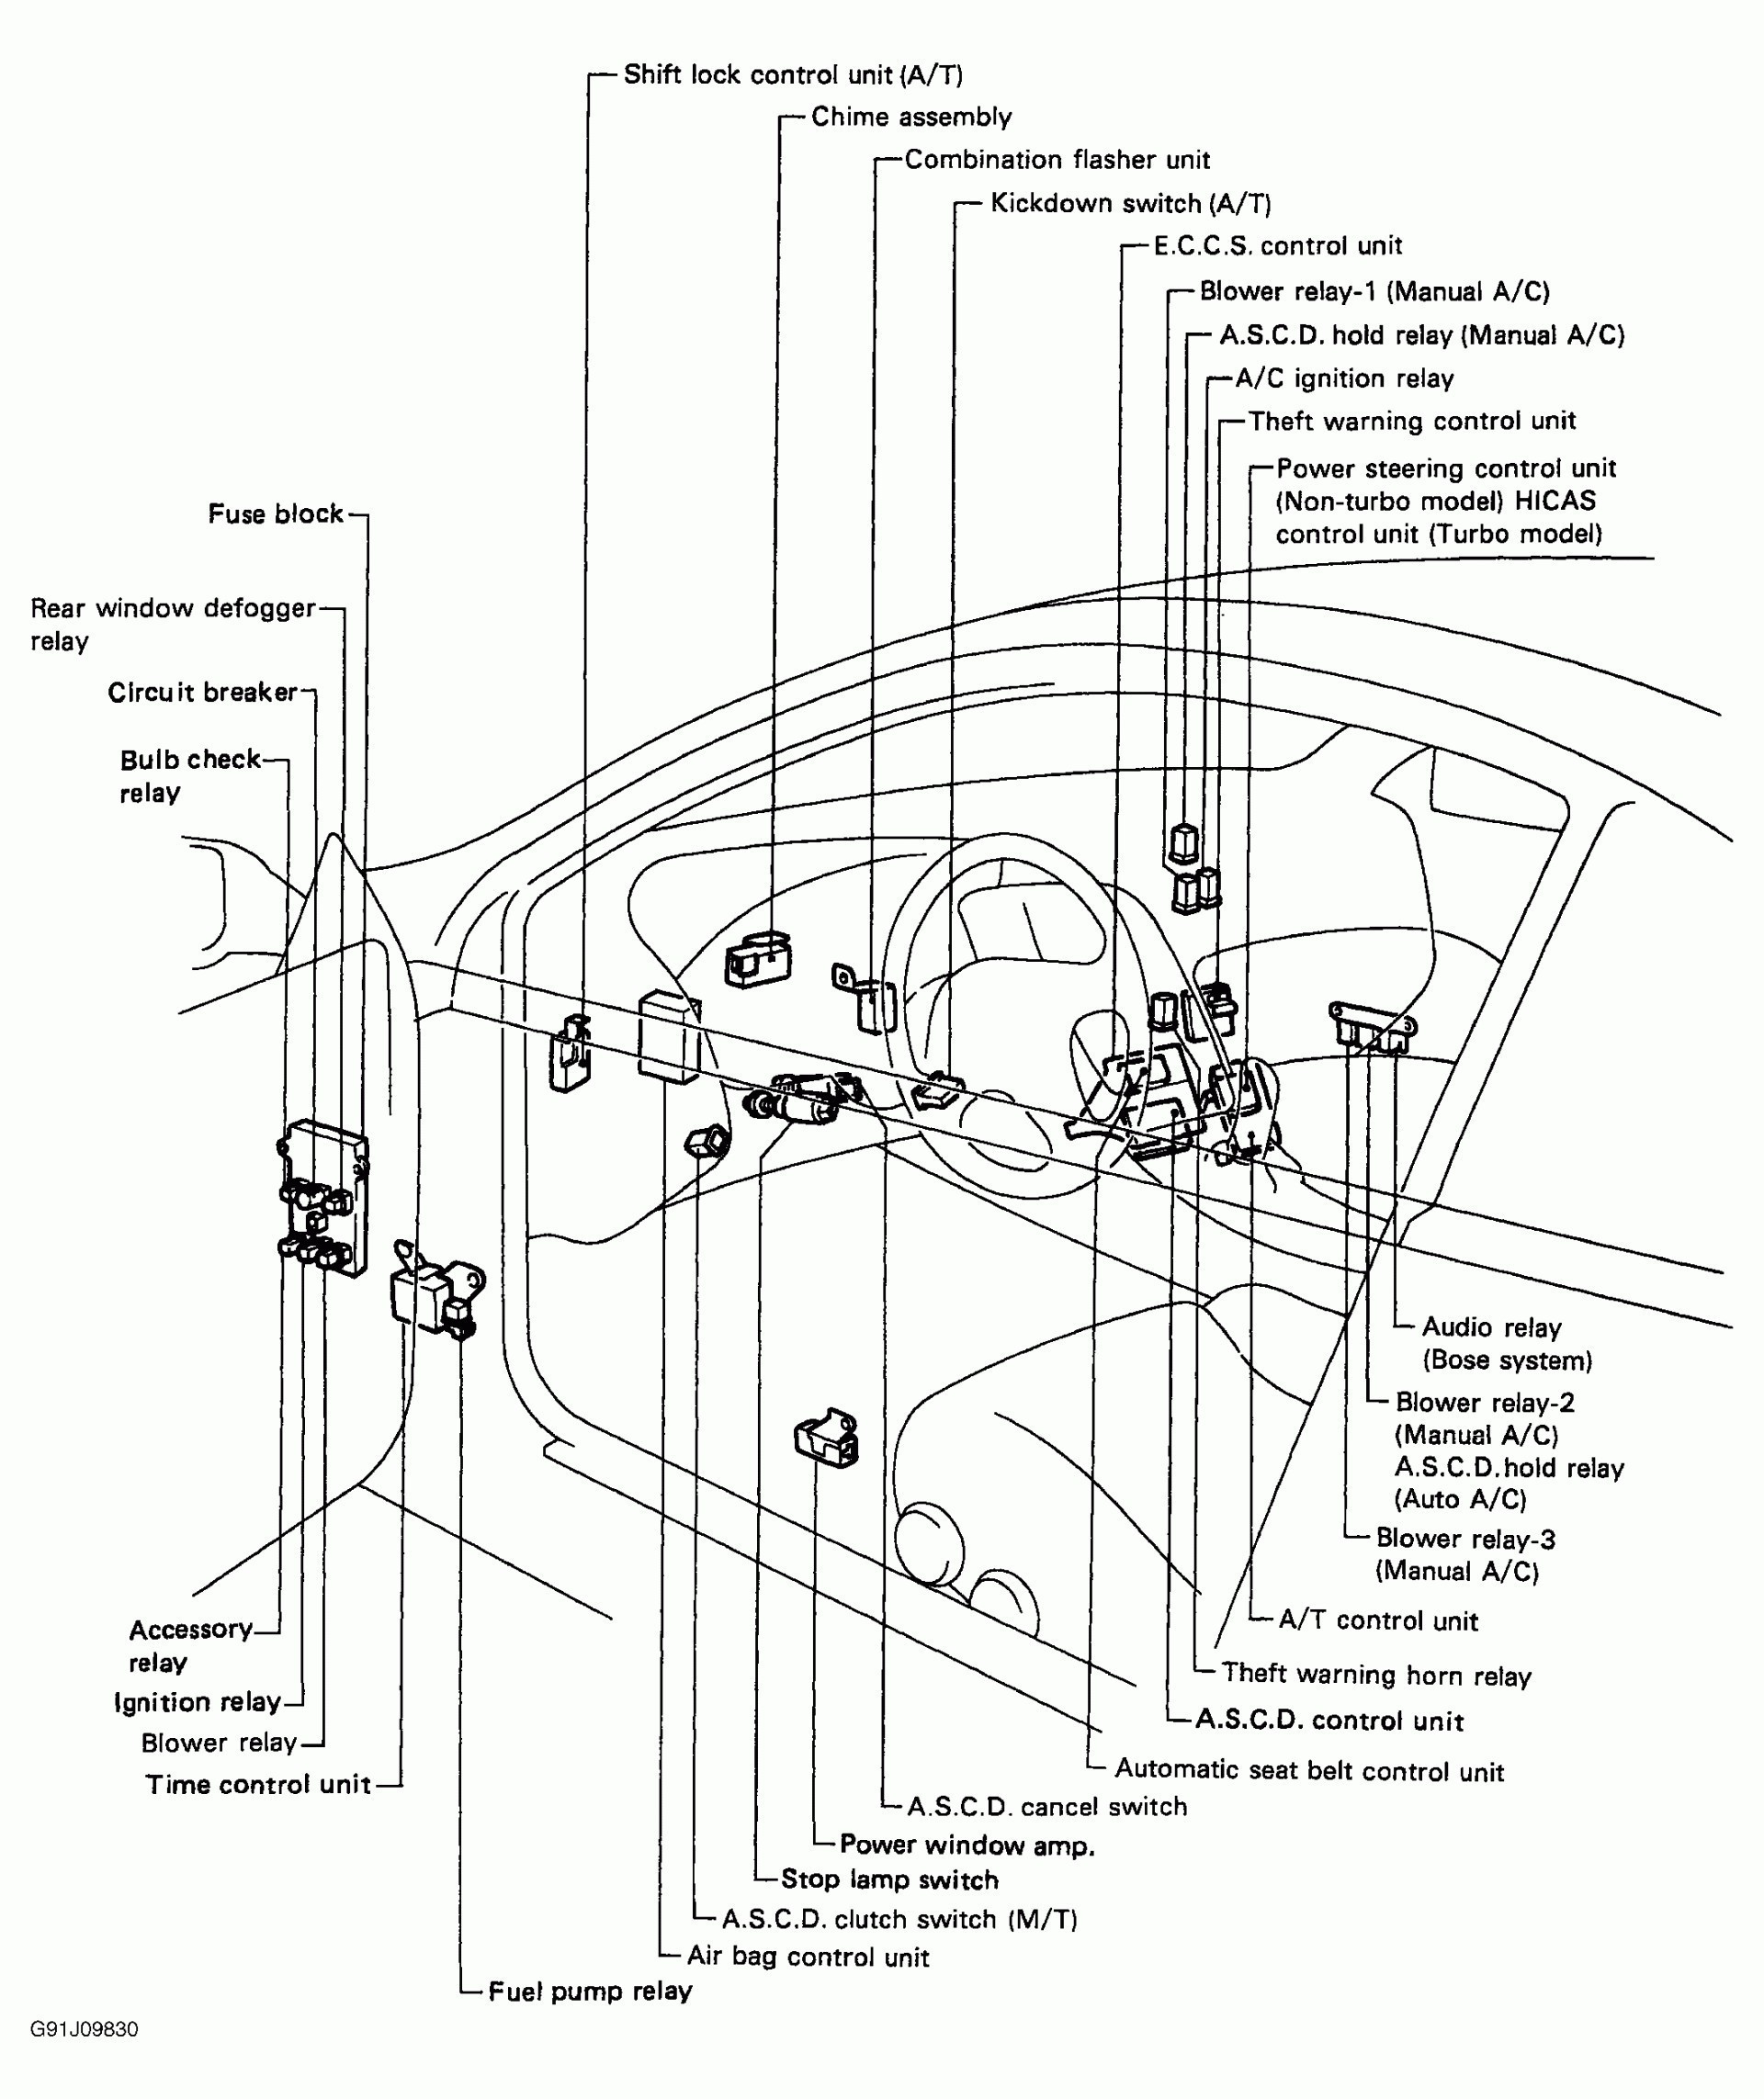 Ford Starter solenoid Wiring Diagram ford Starter solenoid Wiring Diagram Of Ford Starter solenoid Wiring Diagram